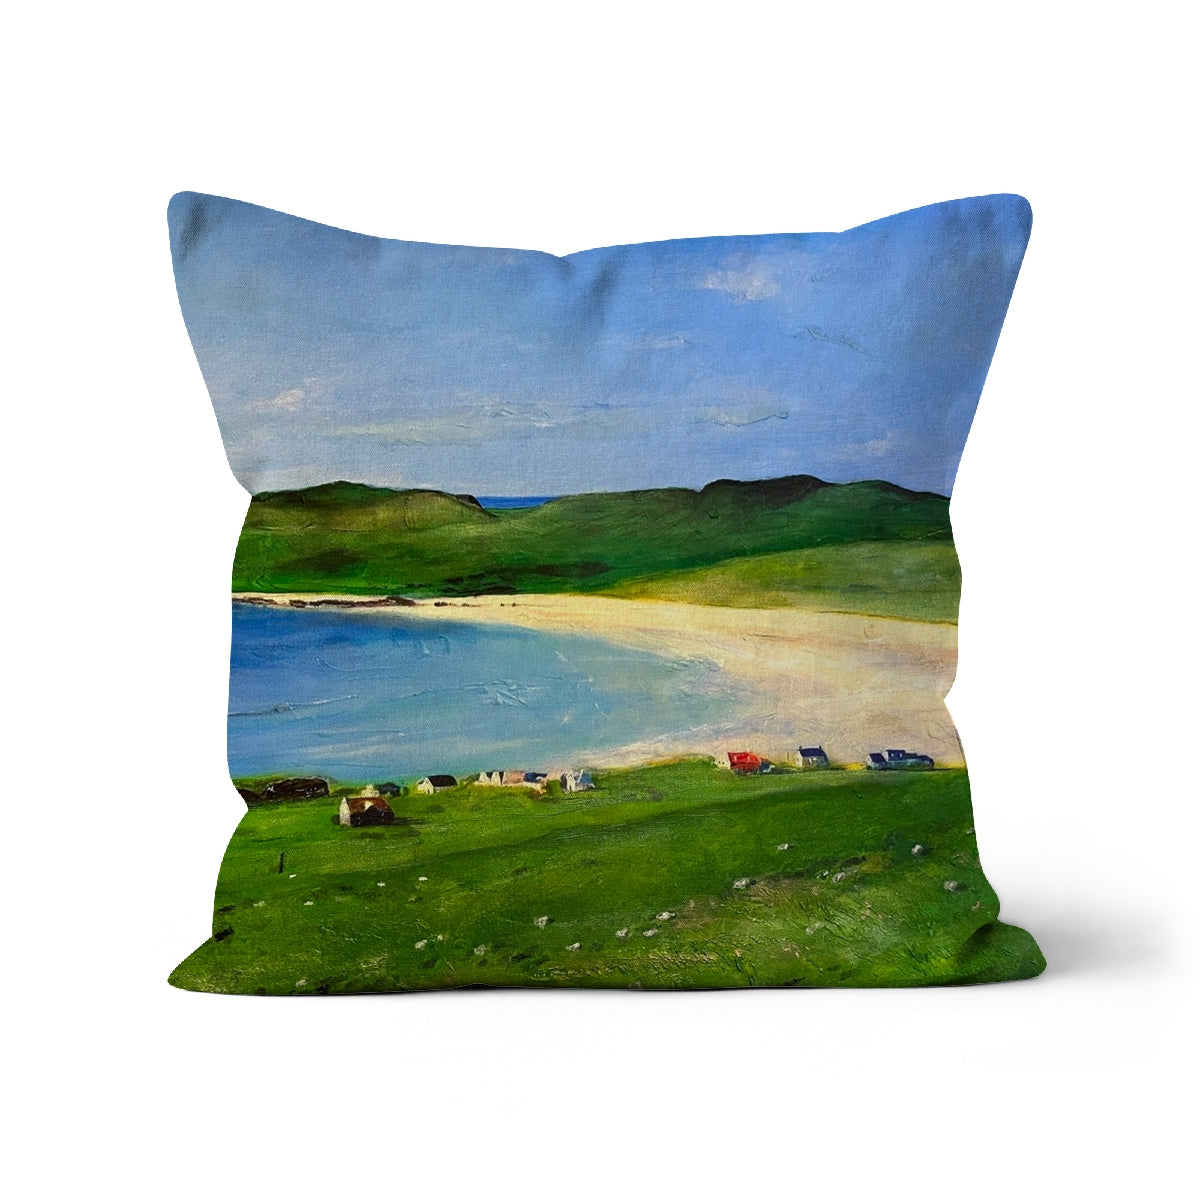 Balephuil Beach Tiree Art Gifts Cushion-Cushions-Hebridean Islands Art Gallery-Canvas-12"x12"-Paintings, Prints, Homeware, Art Gifts From Scotland By Scottish Artist Kevin Hunter